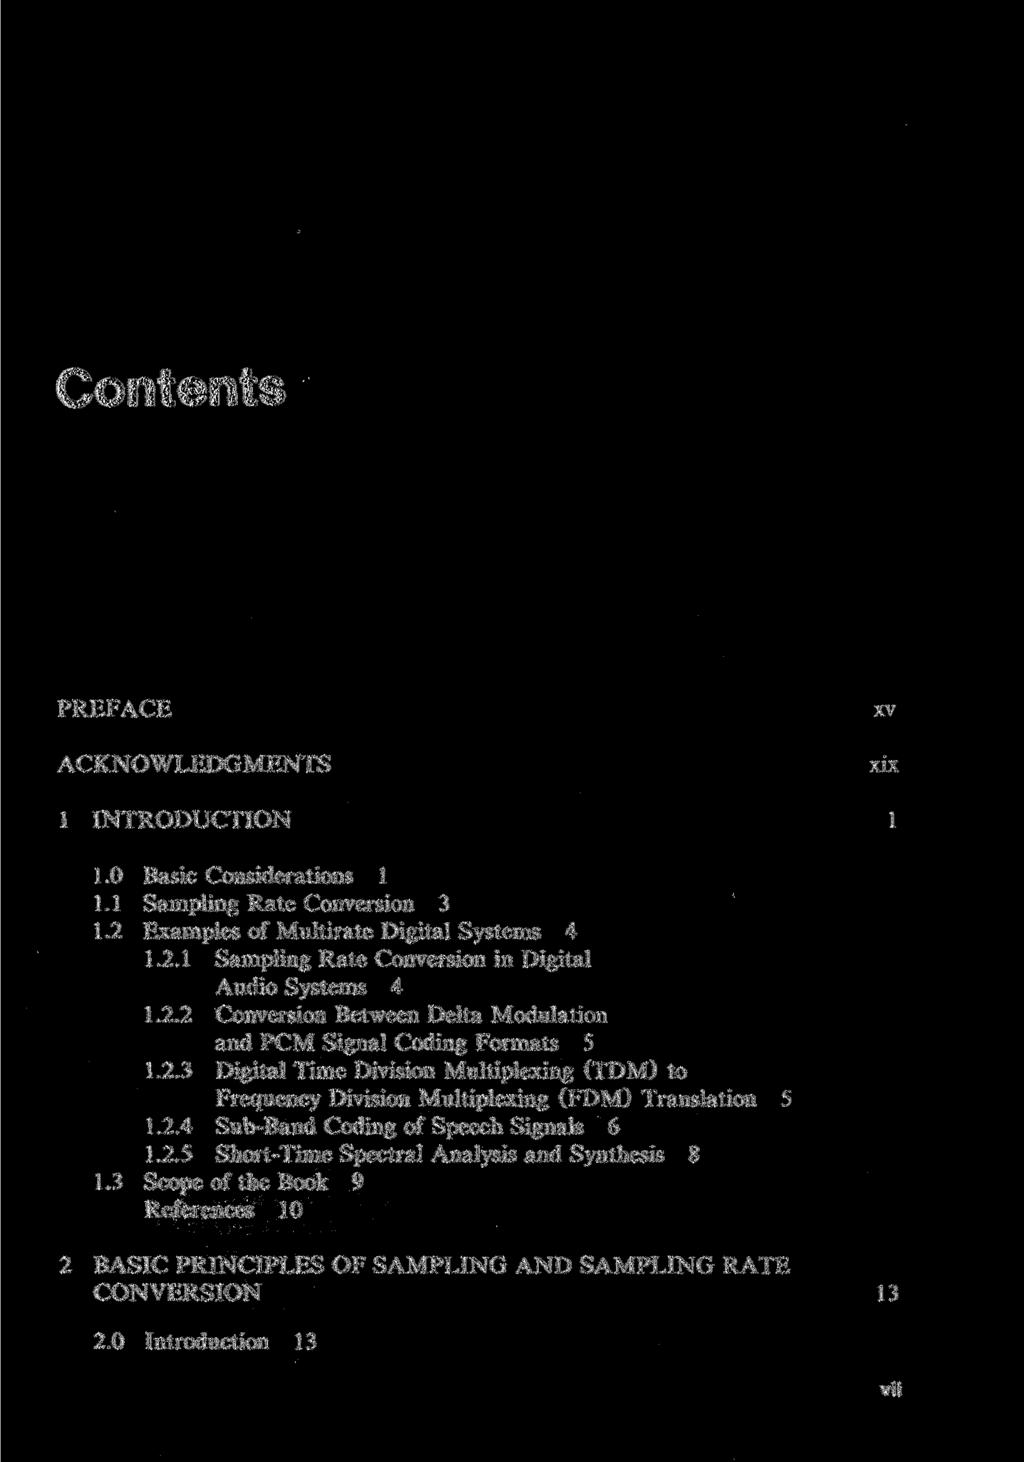 Contents PREFACE ACKNOWLEDGMENTS 1 INTRODUCTION 1.0 Basic Considerations 1 1.1 Sampling Rate Conversion 3 1.2 Examples of Multirate Digital Systems 4 1.2.1 Sampling Rate Conversion in Digital Audio Systems 4 1.